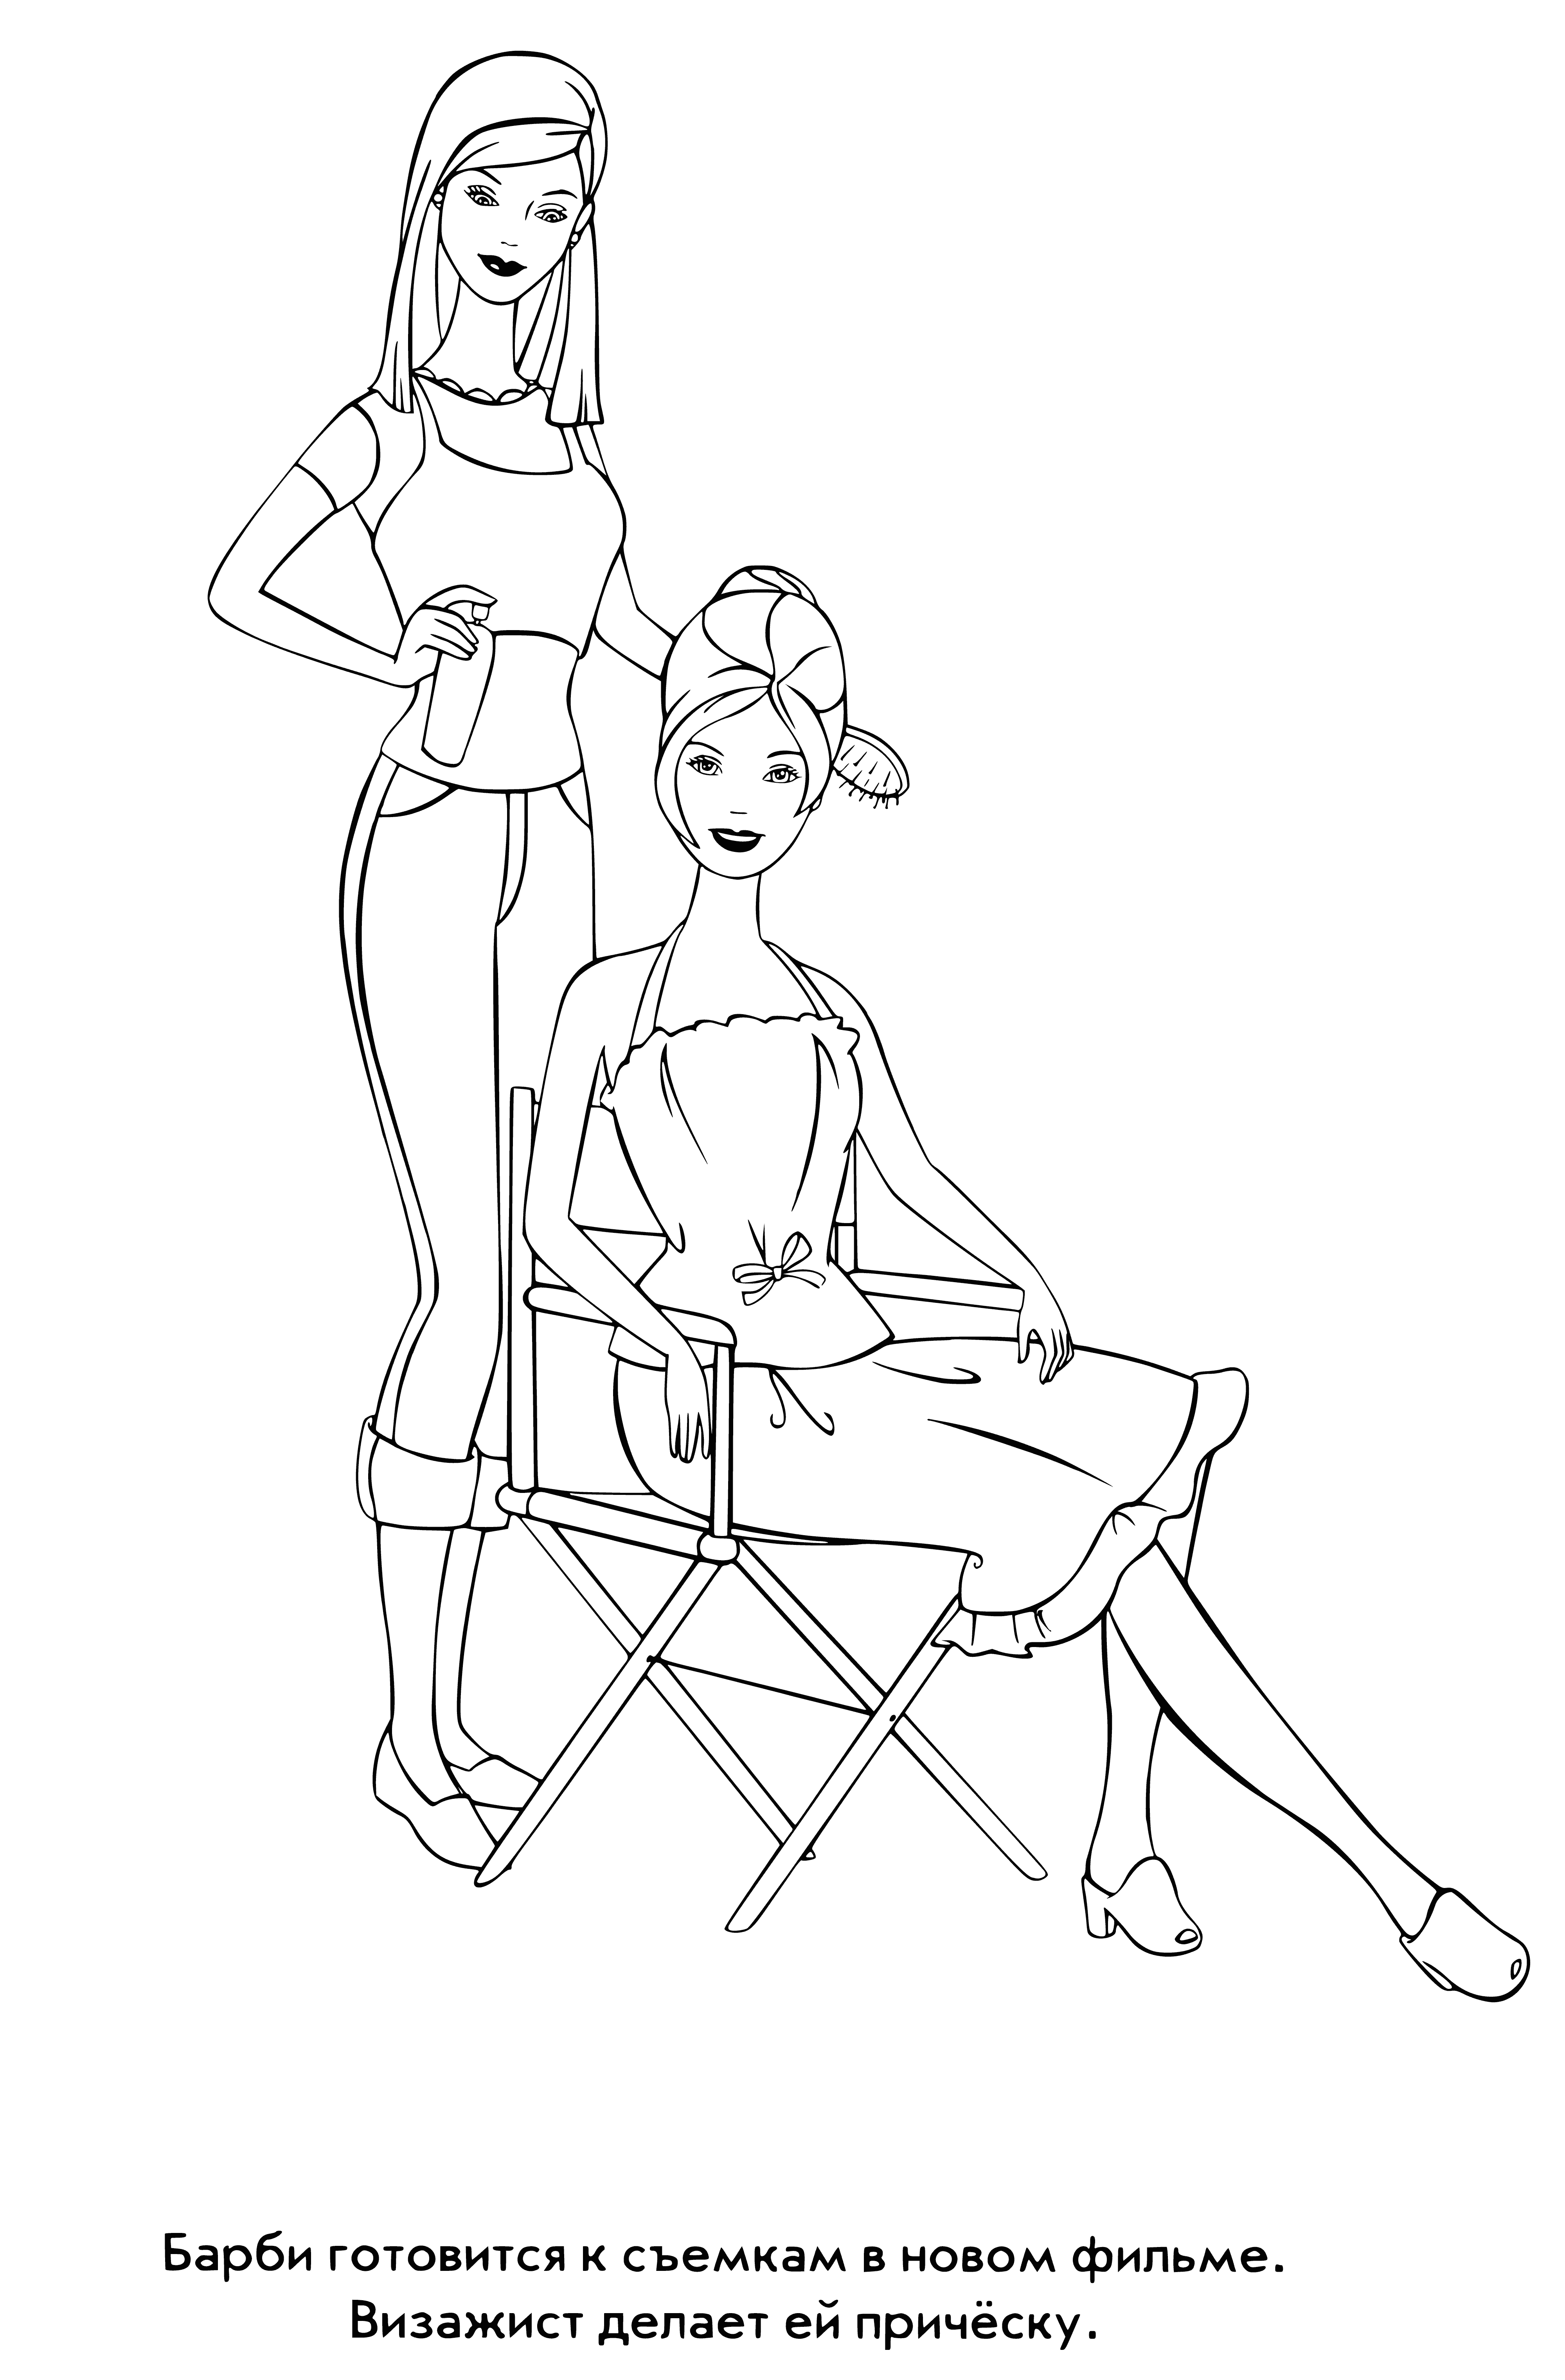 coloring page: Barbie getting ready for a special outing! Blonde hair held back, blue eyes closed, pink dress and black belt w/ shoes, as makeup artist preps her.